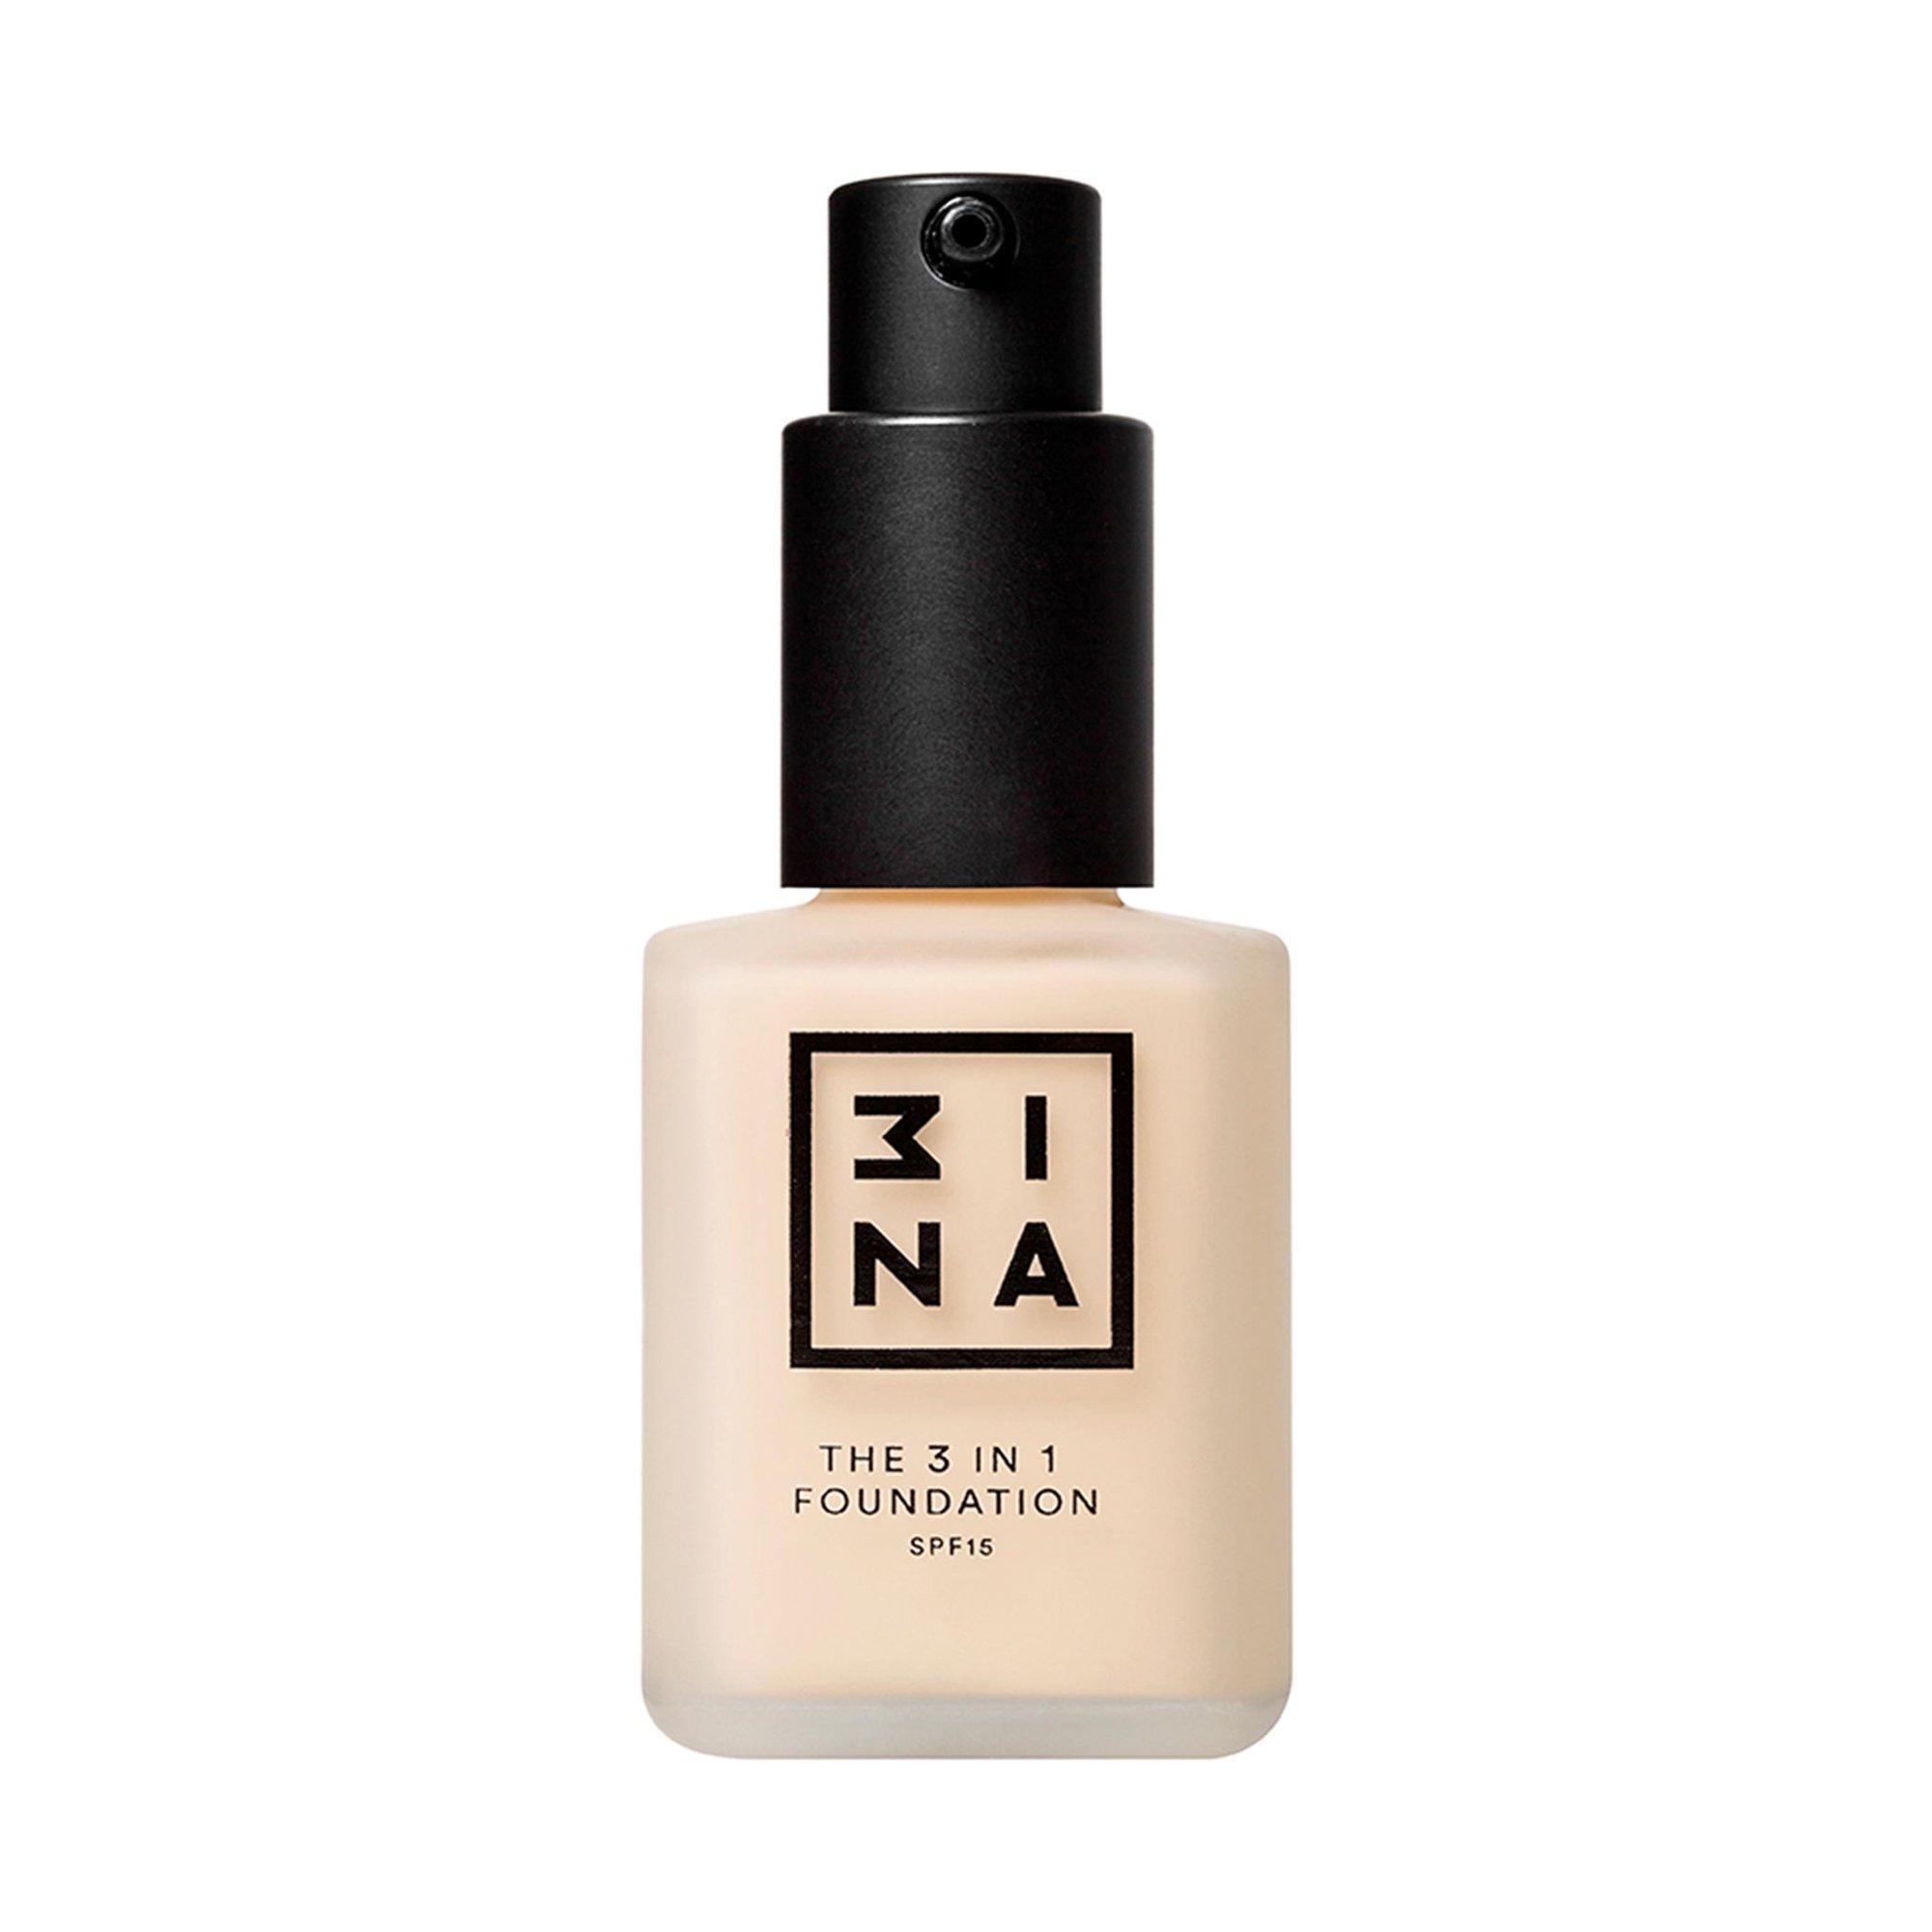 Image of 3INA The 3 in 1 Foundation The 3 in 1 Foundation - 30ml